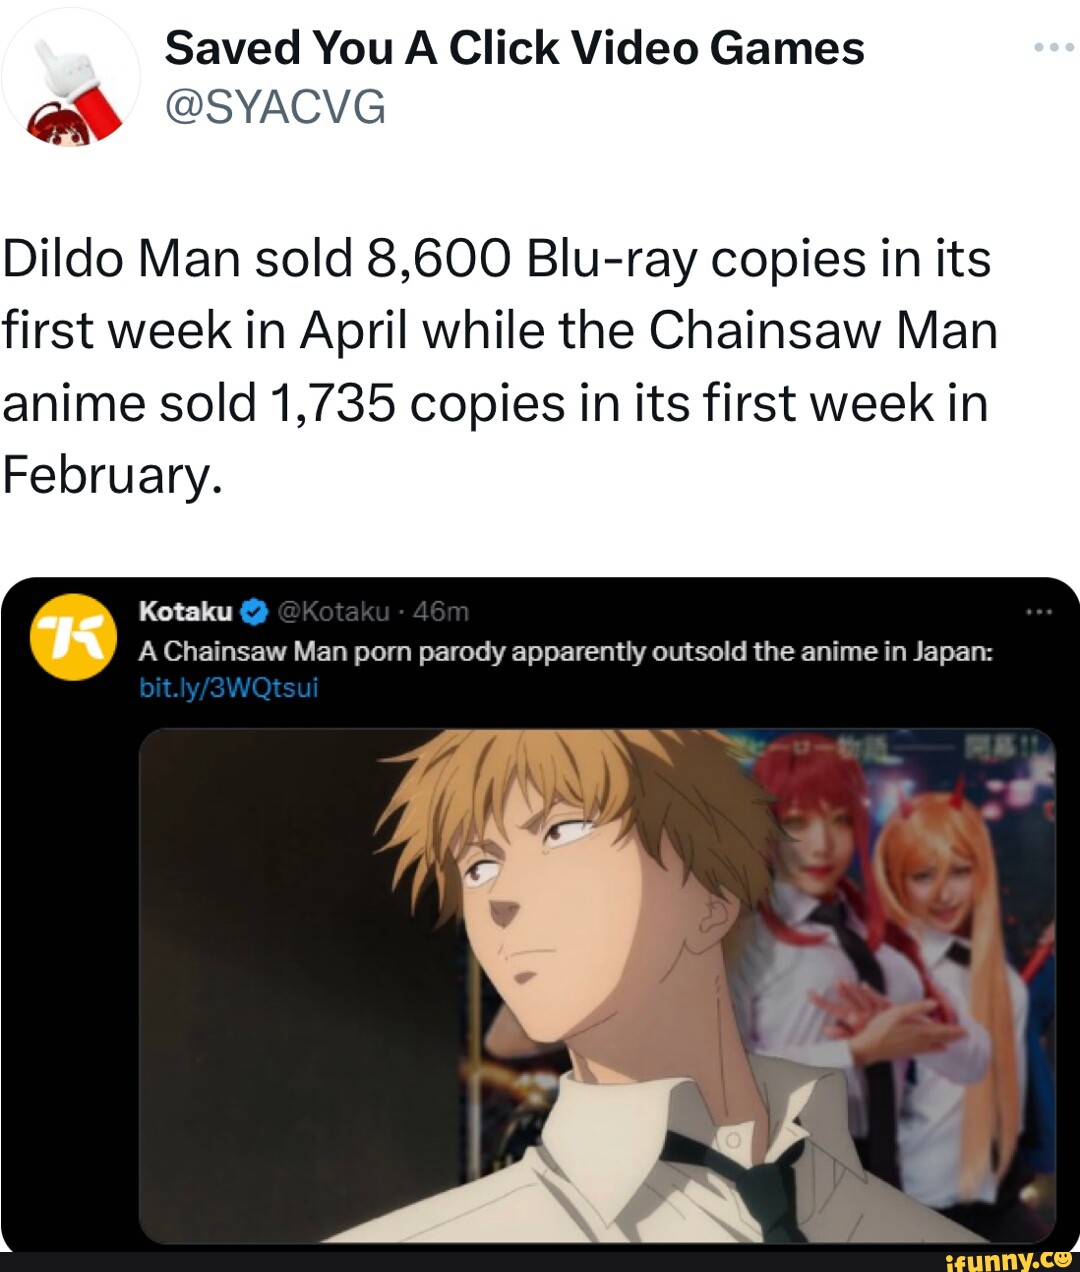 Flagship StoresSaved You A Click Video Games ee @SYACVG Dildo Man sold  8,600 Blu-ray copies in its first week in April while the Chainsaw Man  anime sold 1,735 copies in its first